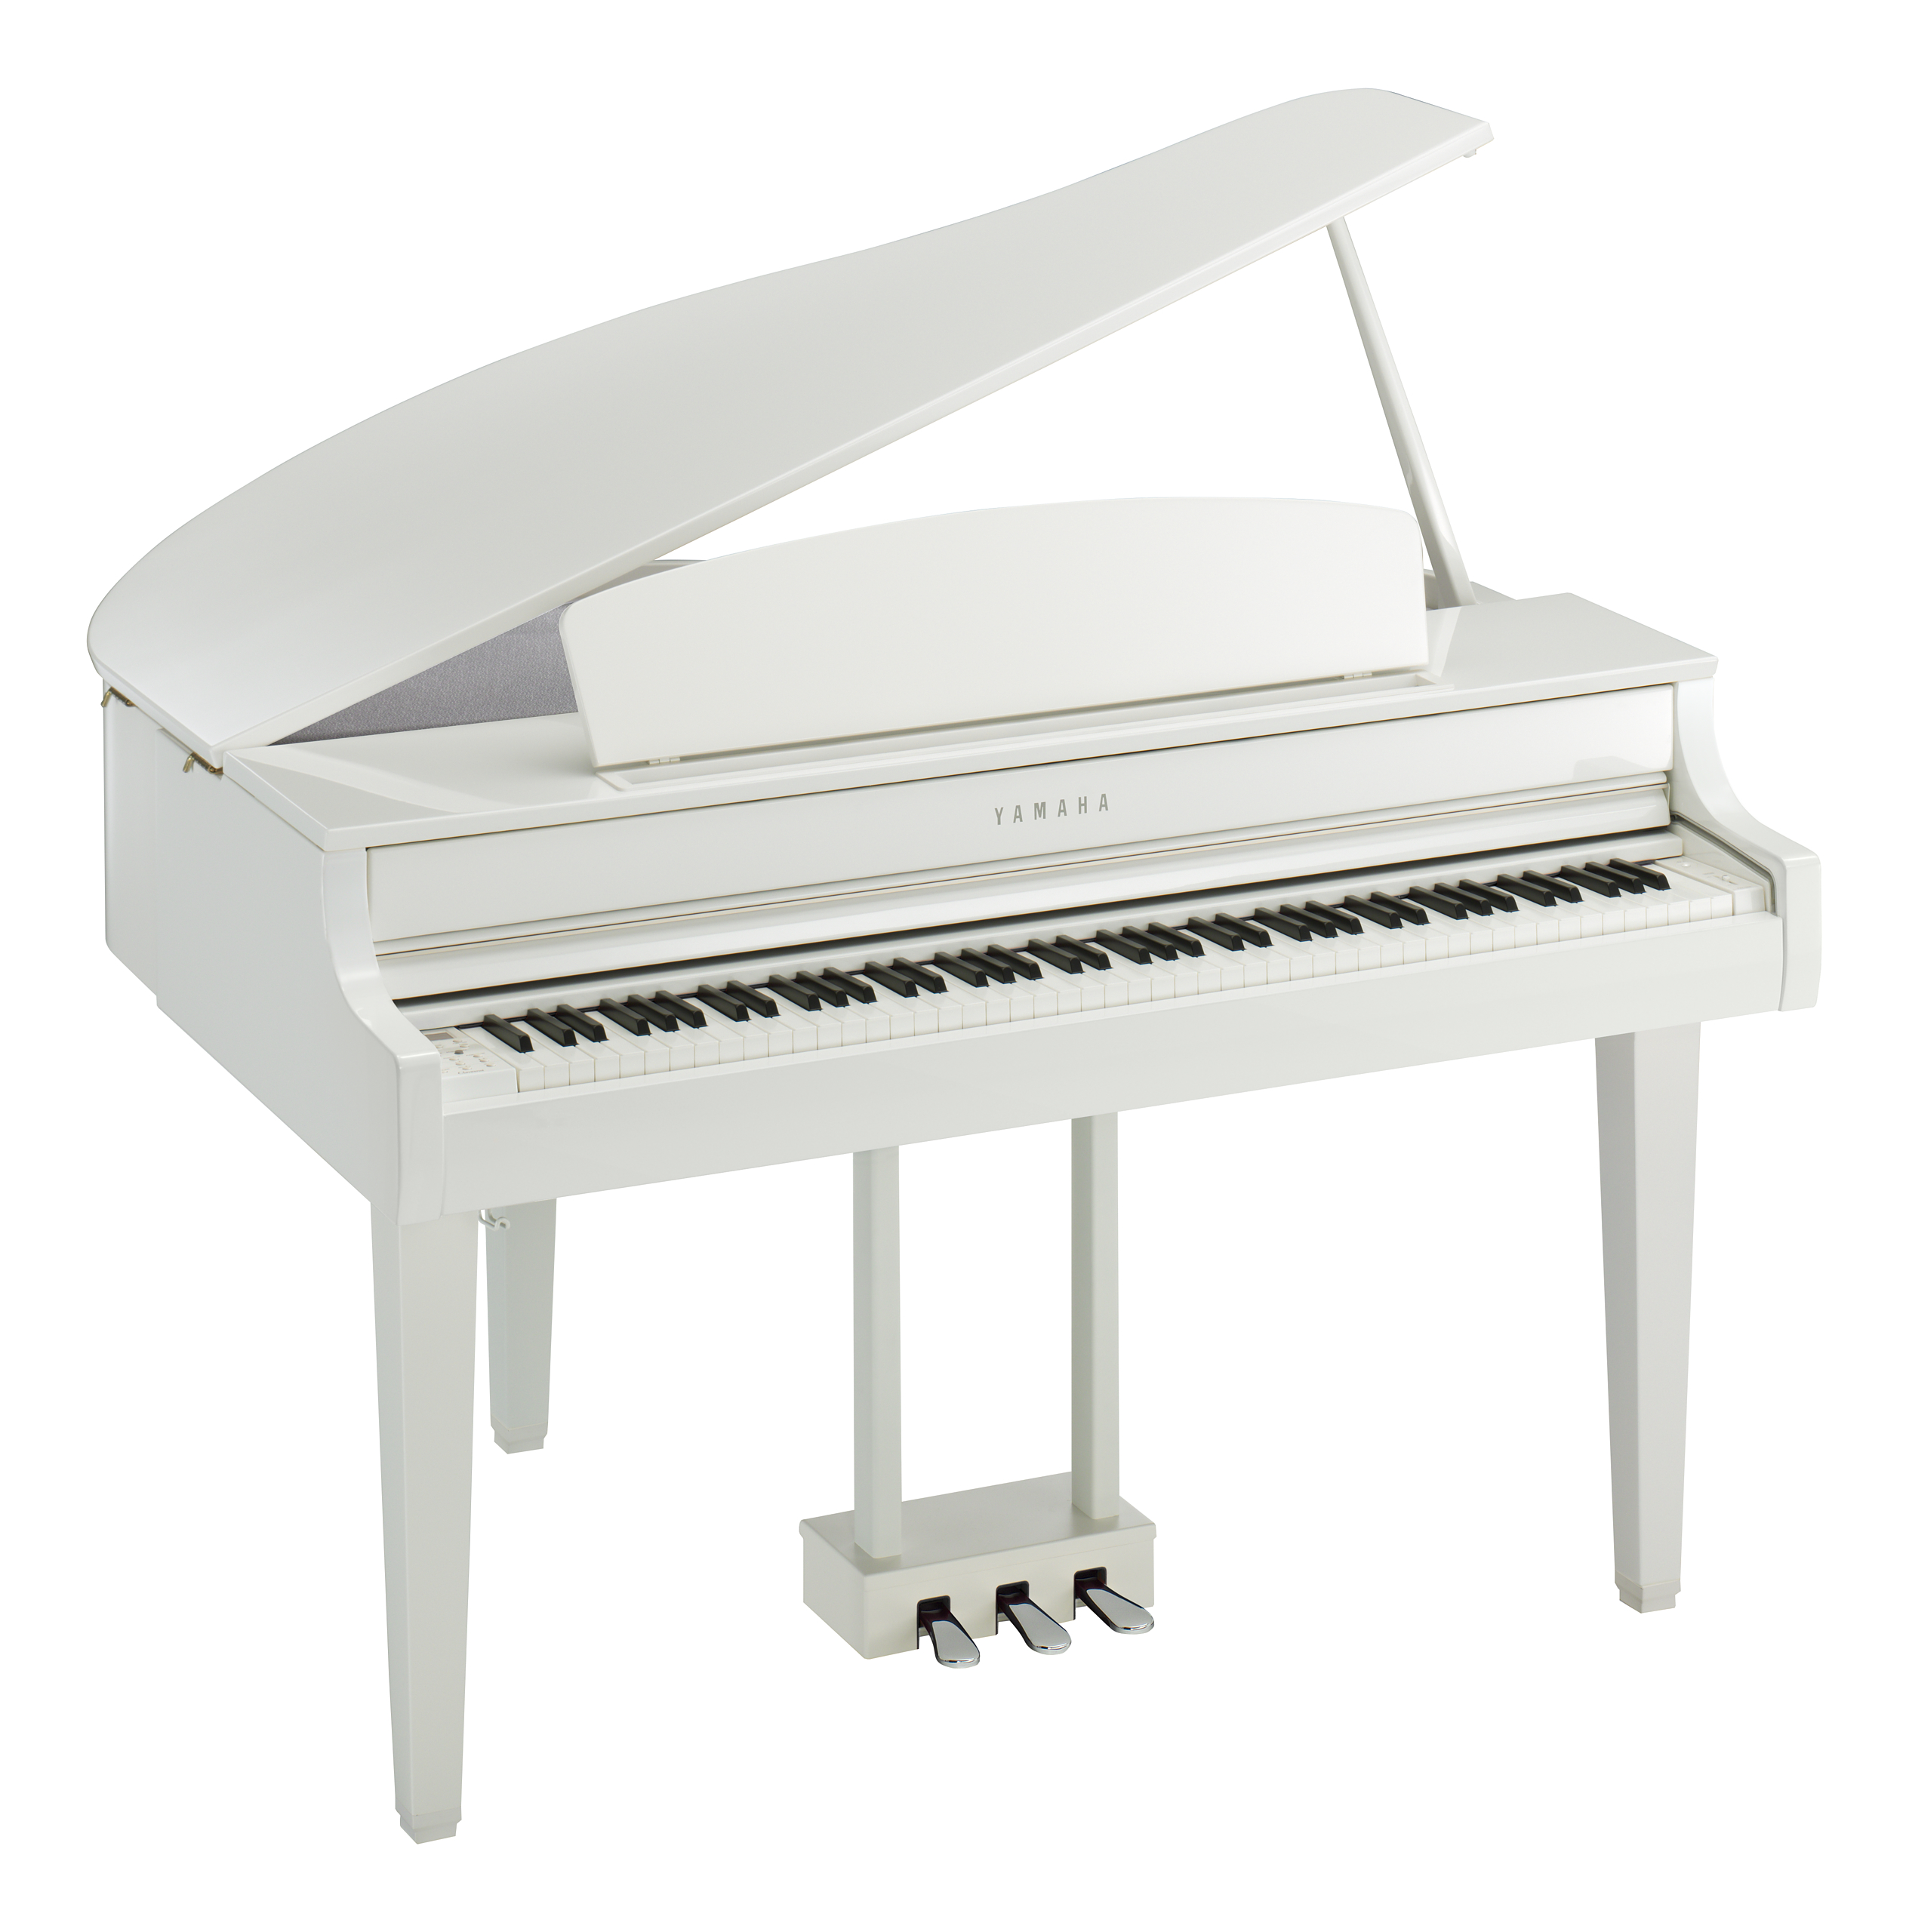 Yamaha Clp765gp Wh - Digital piano with stand - Variation 1